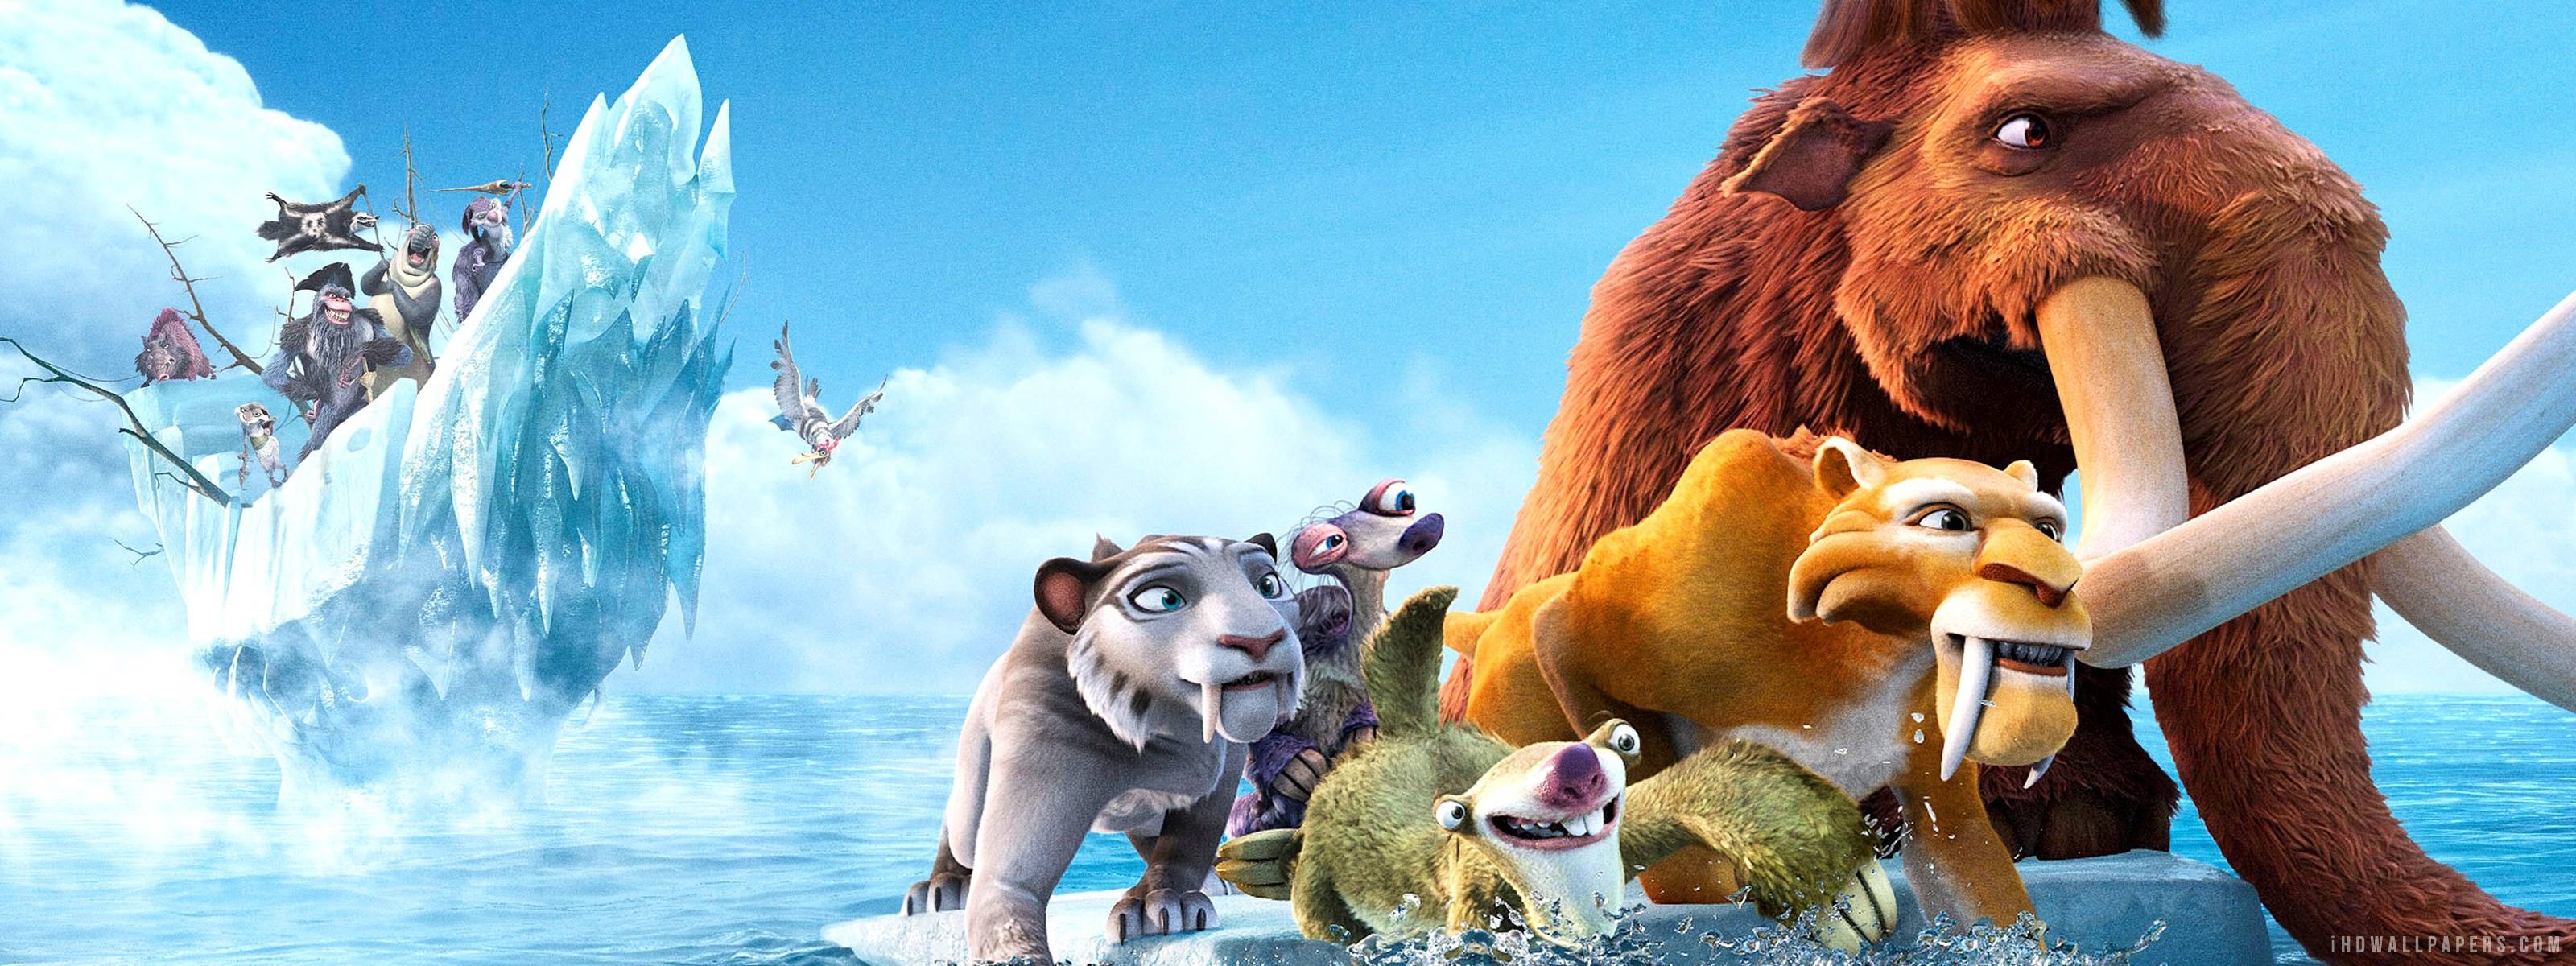 image For > Ice Age Wallpaper HD